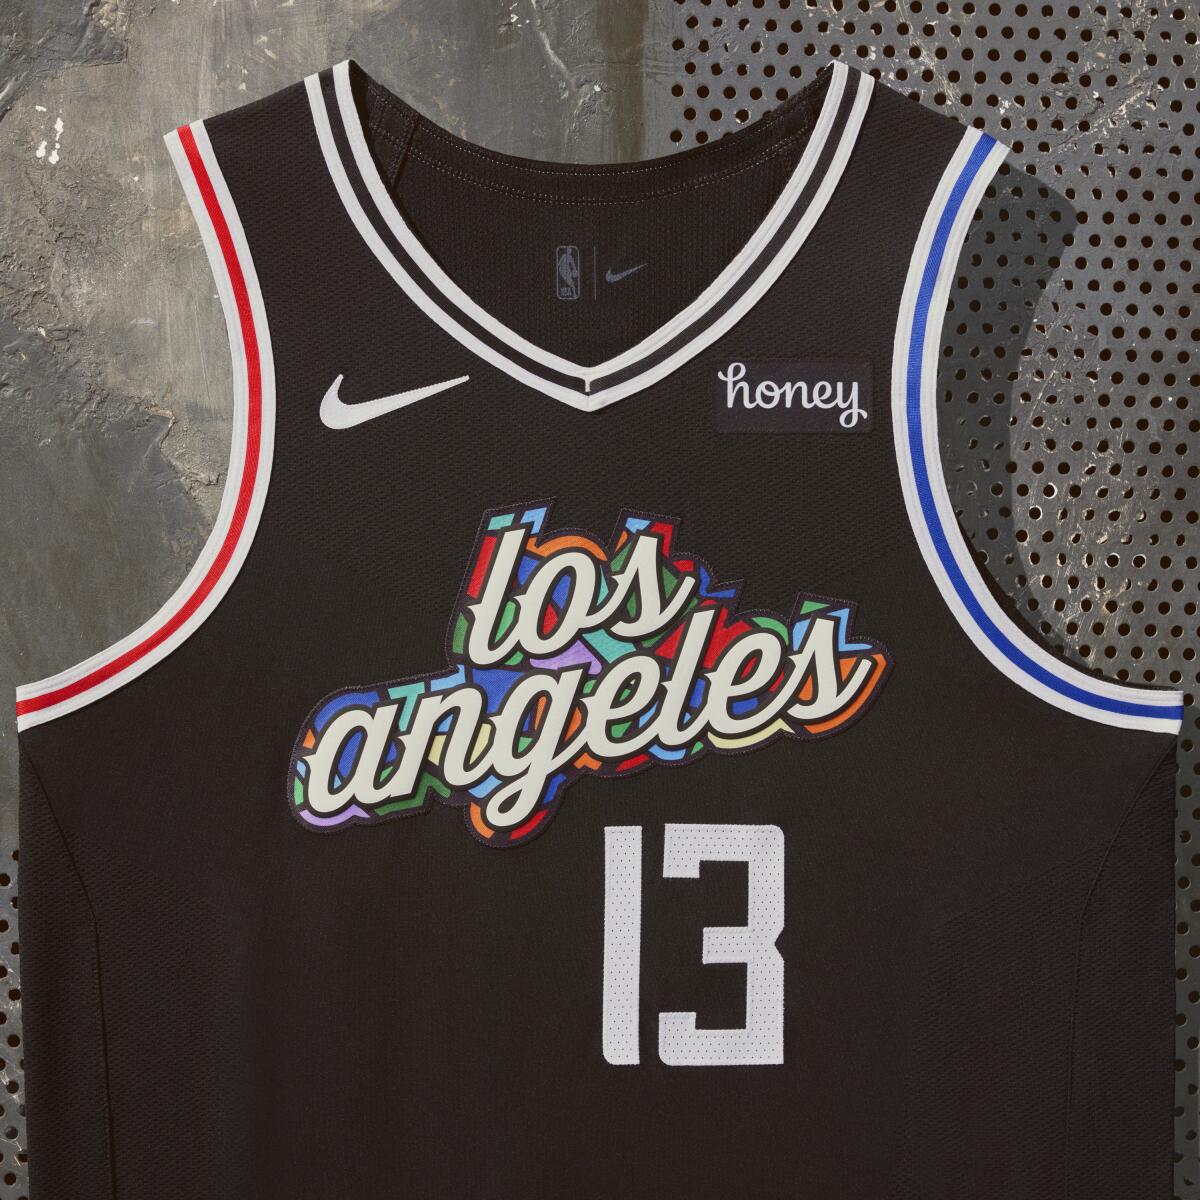 Clippers 2022-23 City Edition jersey